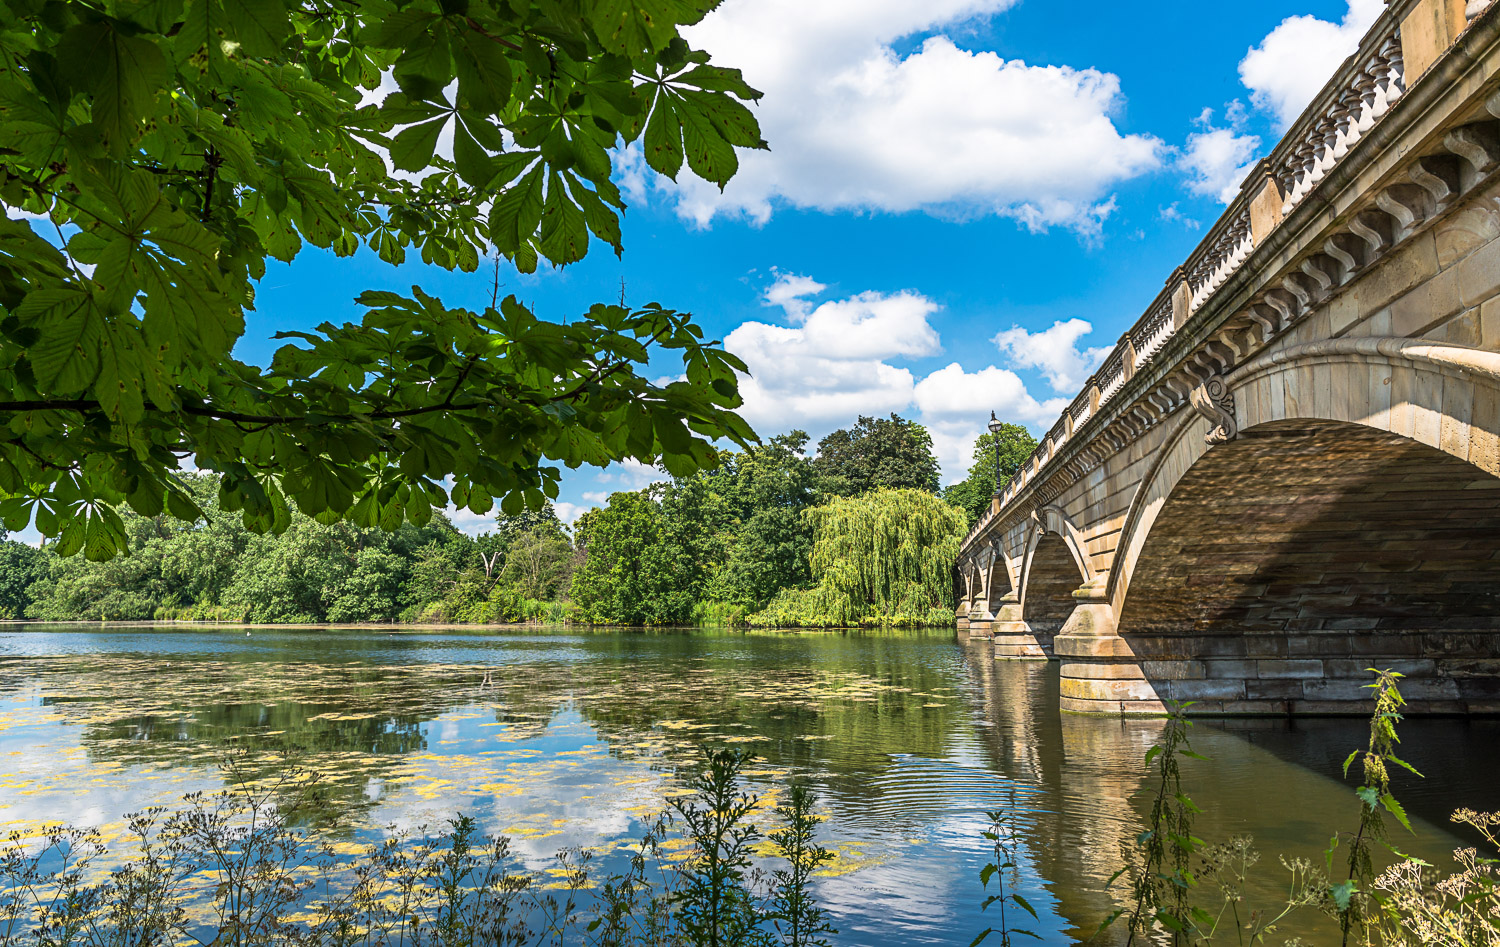 View across the water of the Serpentine in Hyde Park to the bridge with trees reflected in the water - where to cool down during a heatwave, including London attractions with air conditioning